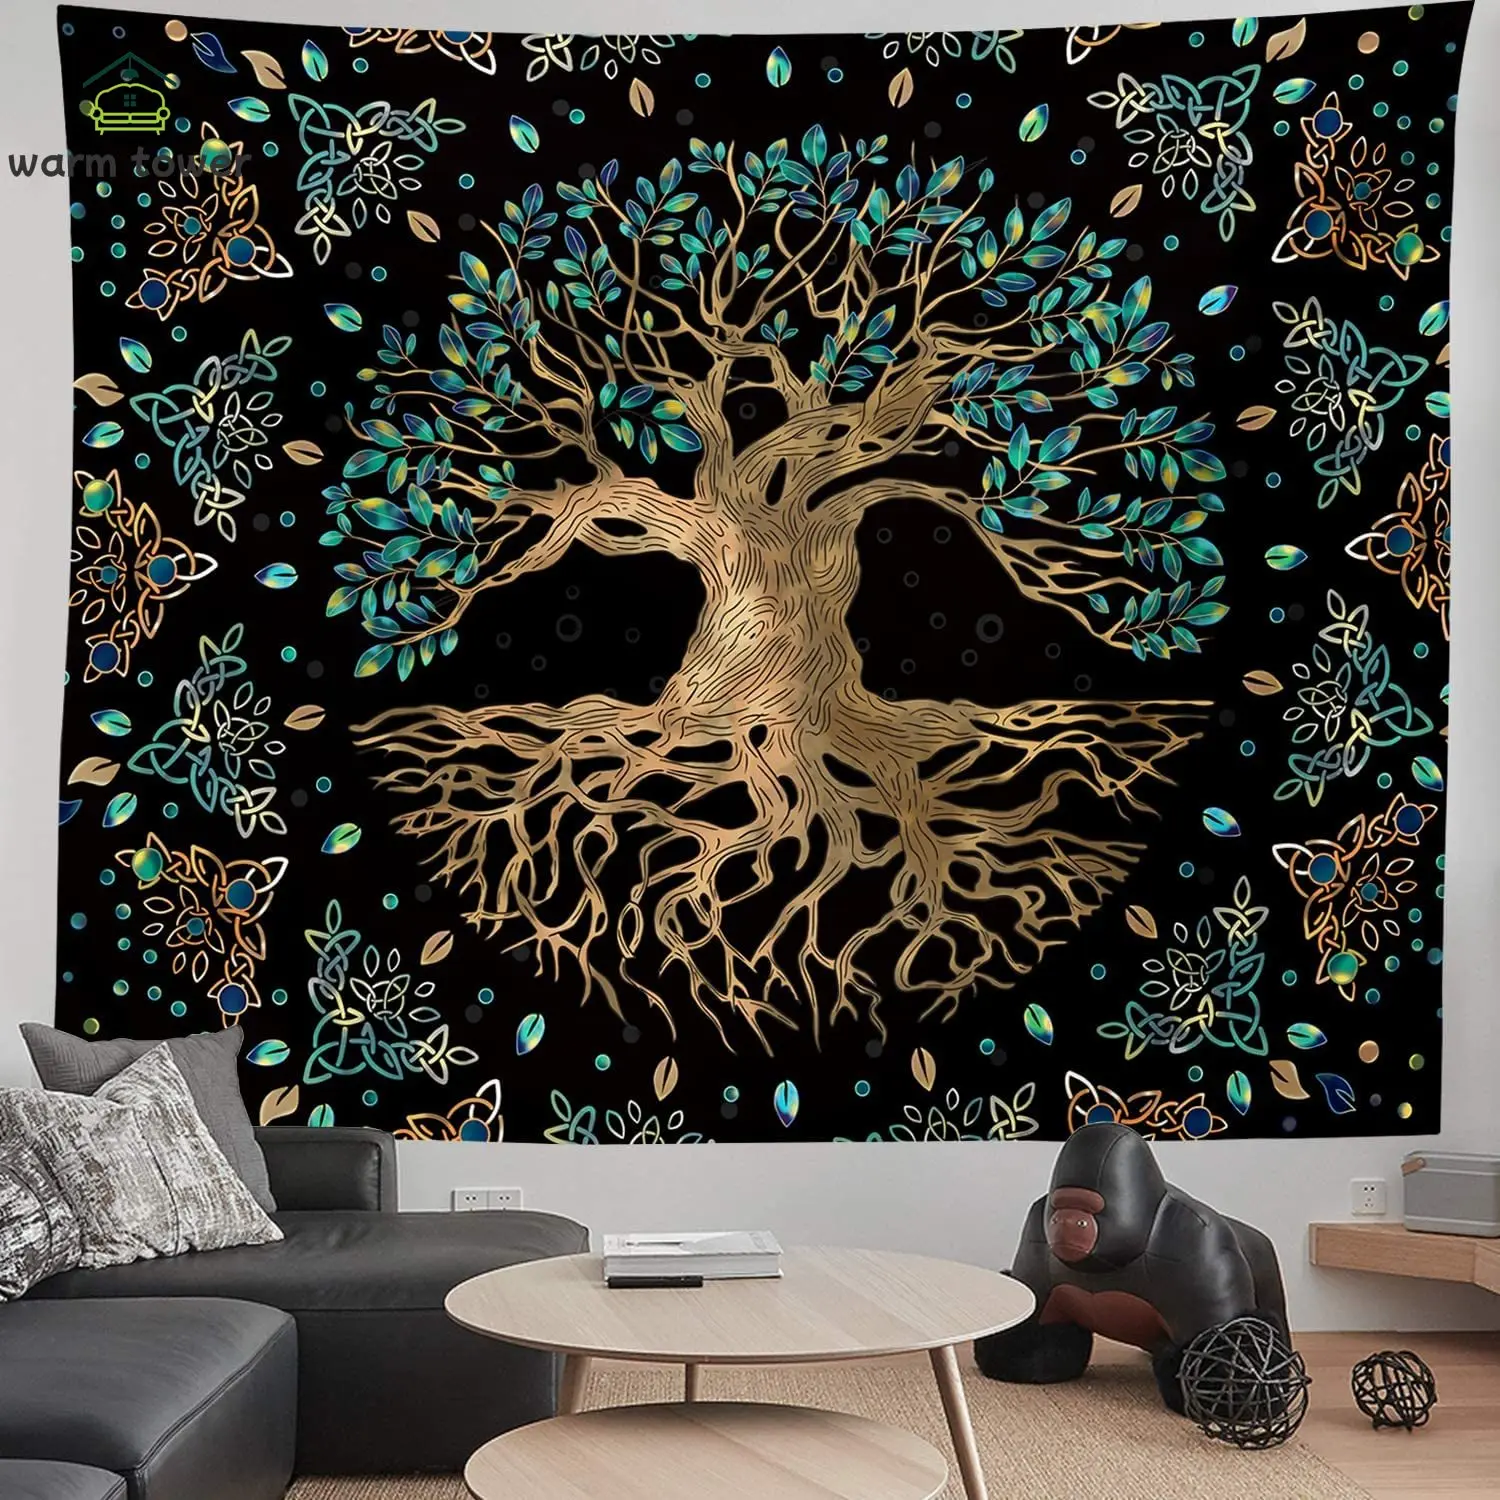 

Life Tree Tapestry Wall Hanging - Bohemian Hippie Wishing Tree Tapestries Psychedelic Wall Carpet Mystic Aesthetic Wall Tapestry